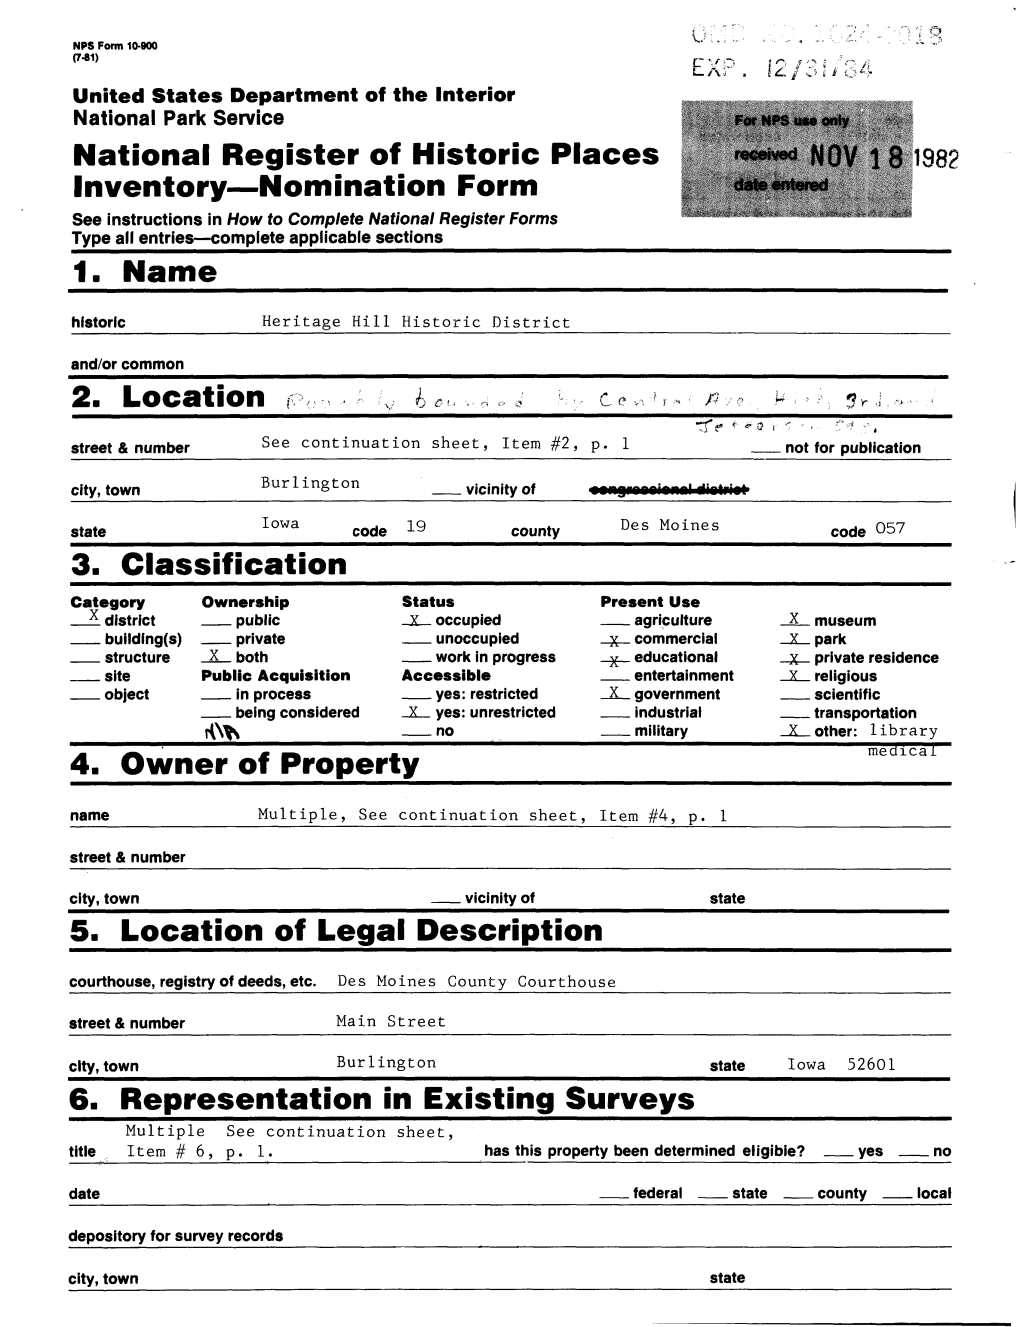 3. Classification 4. Owner of Property